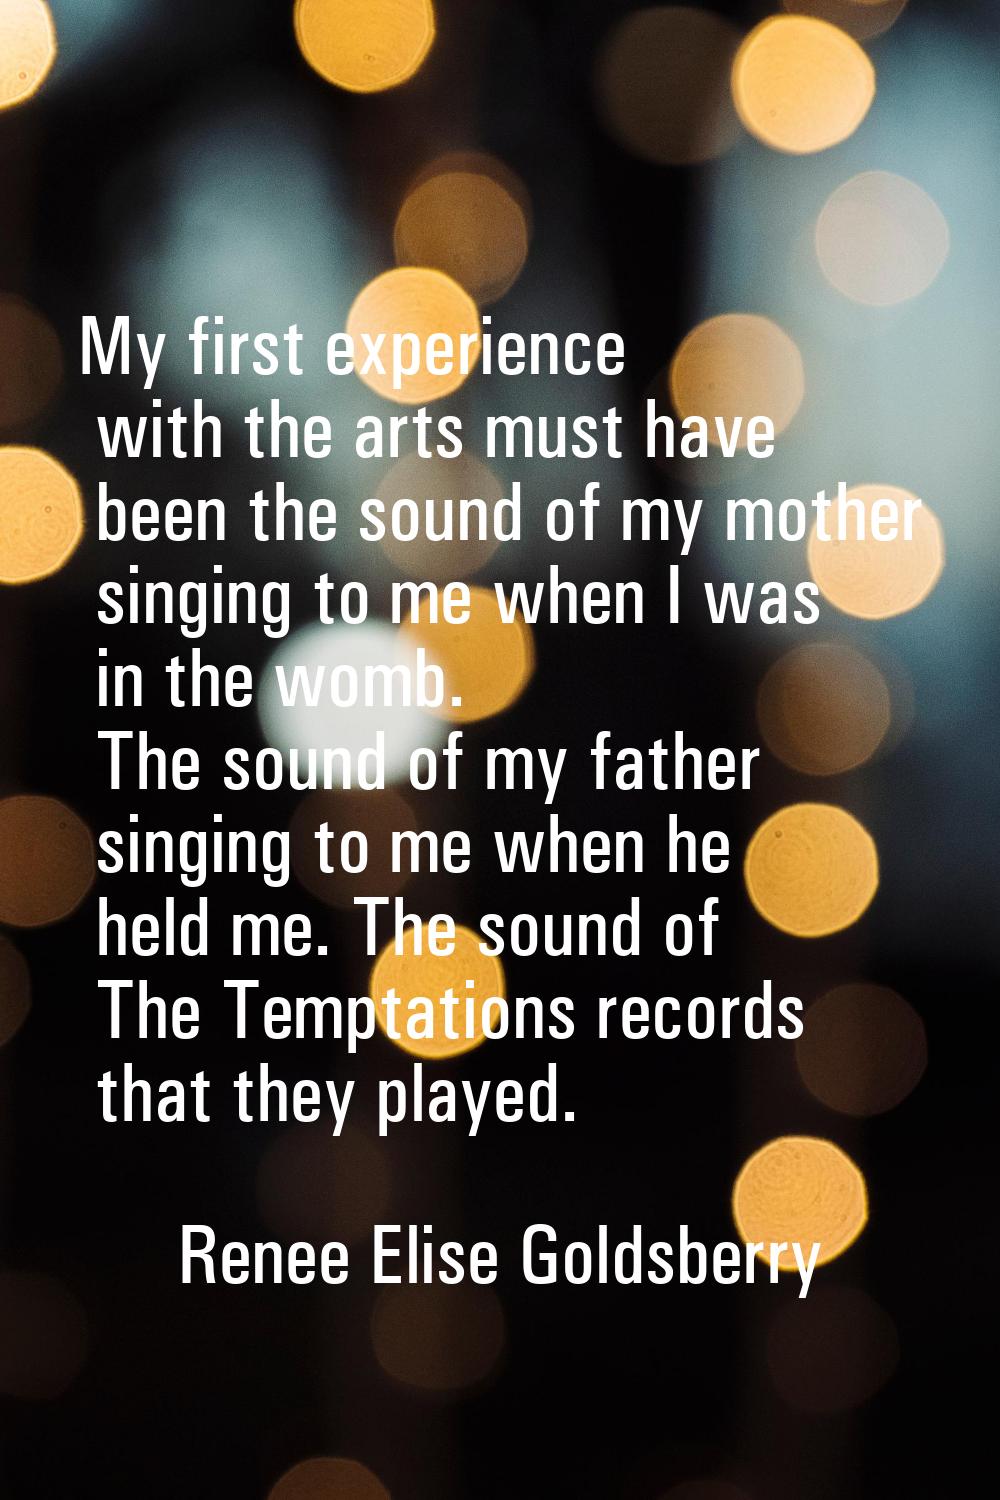 My first experience with the arts must have been the sound of my mother singing to me when I was in